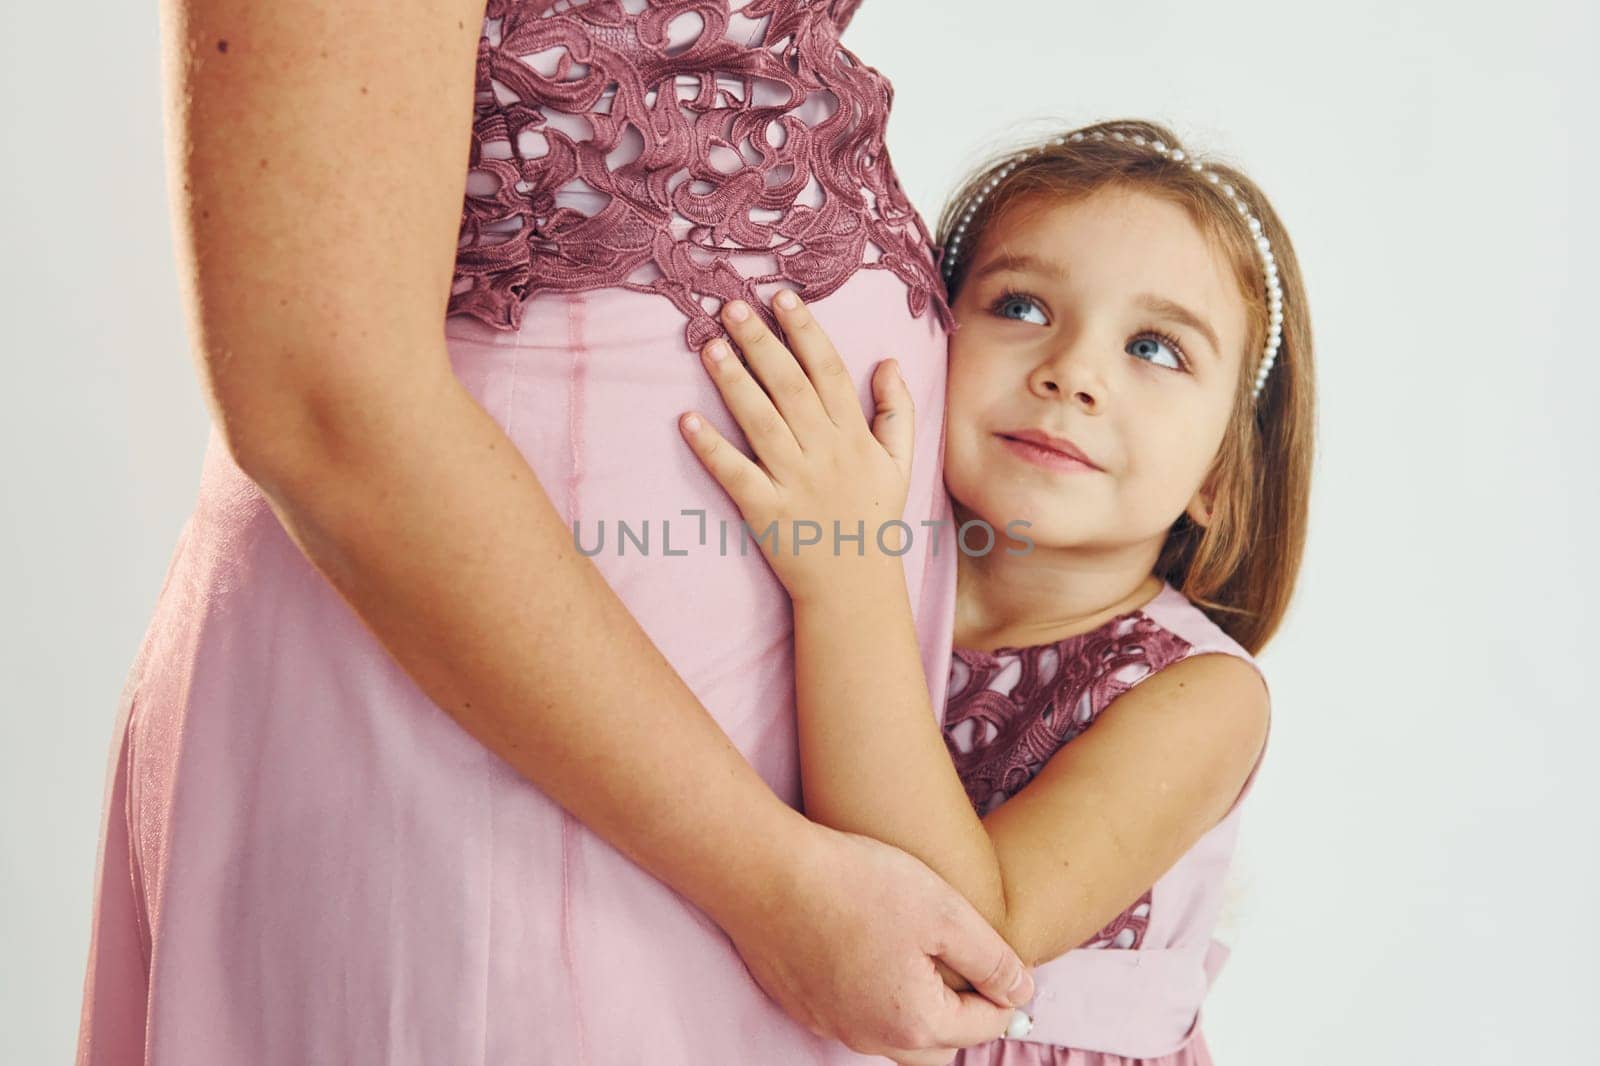 Woman is pregnant. Mother in dress standing with her daughter in the studio with white background.